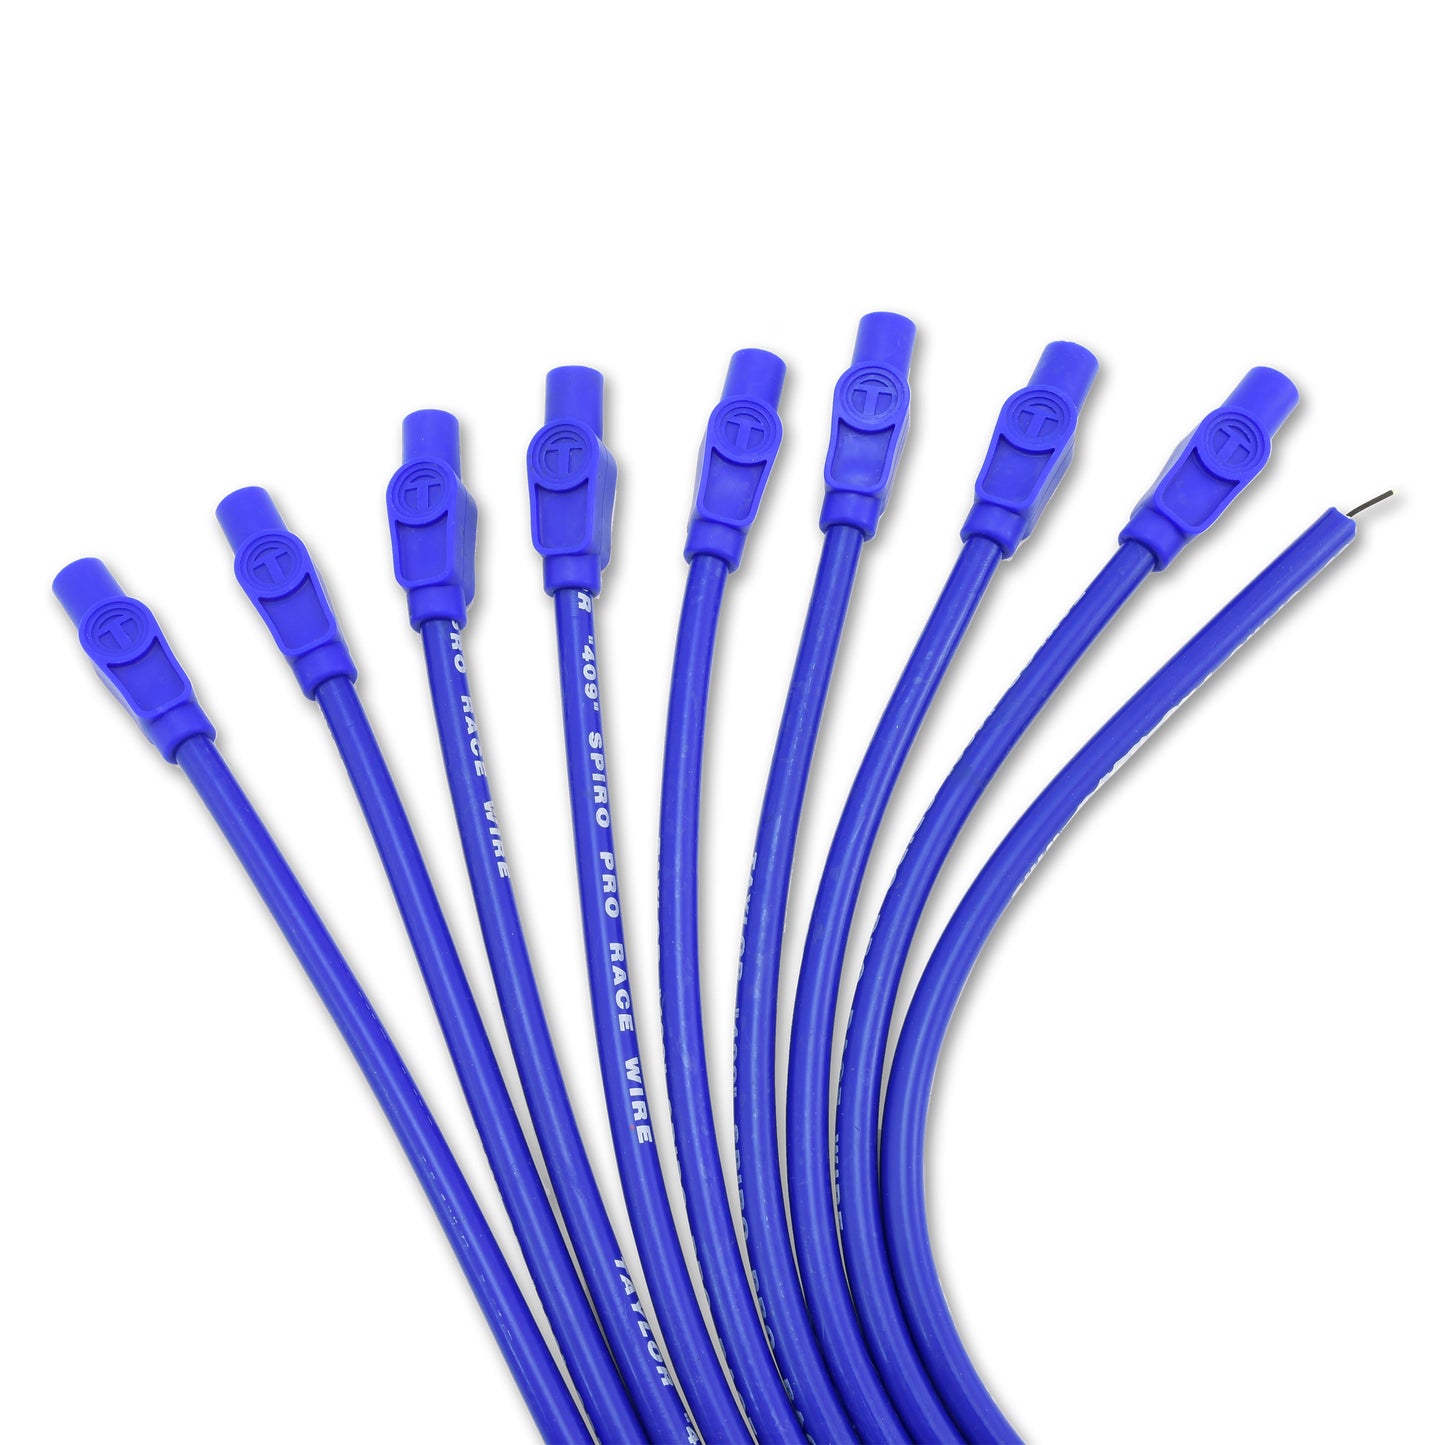 Taylor Cable 79655 10.4mm 409 Spiro-Pro Ignition Wires univ 8 cyl 180 blue